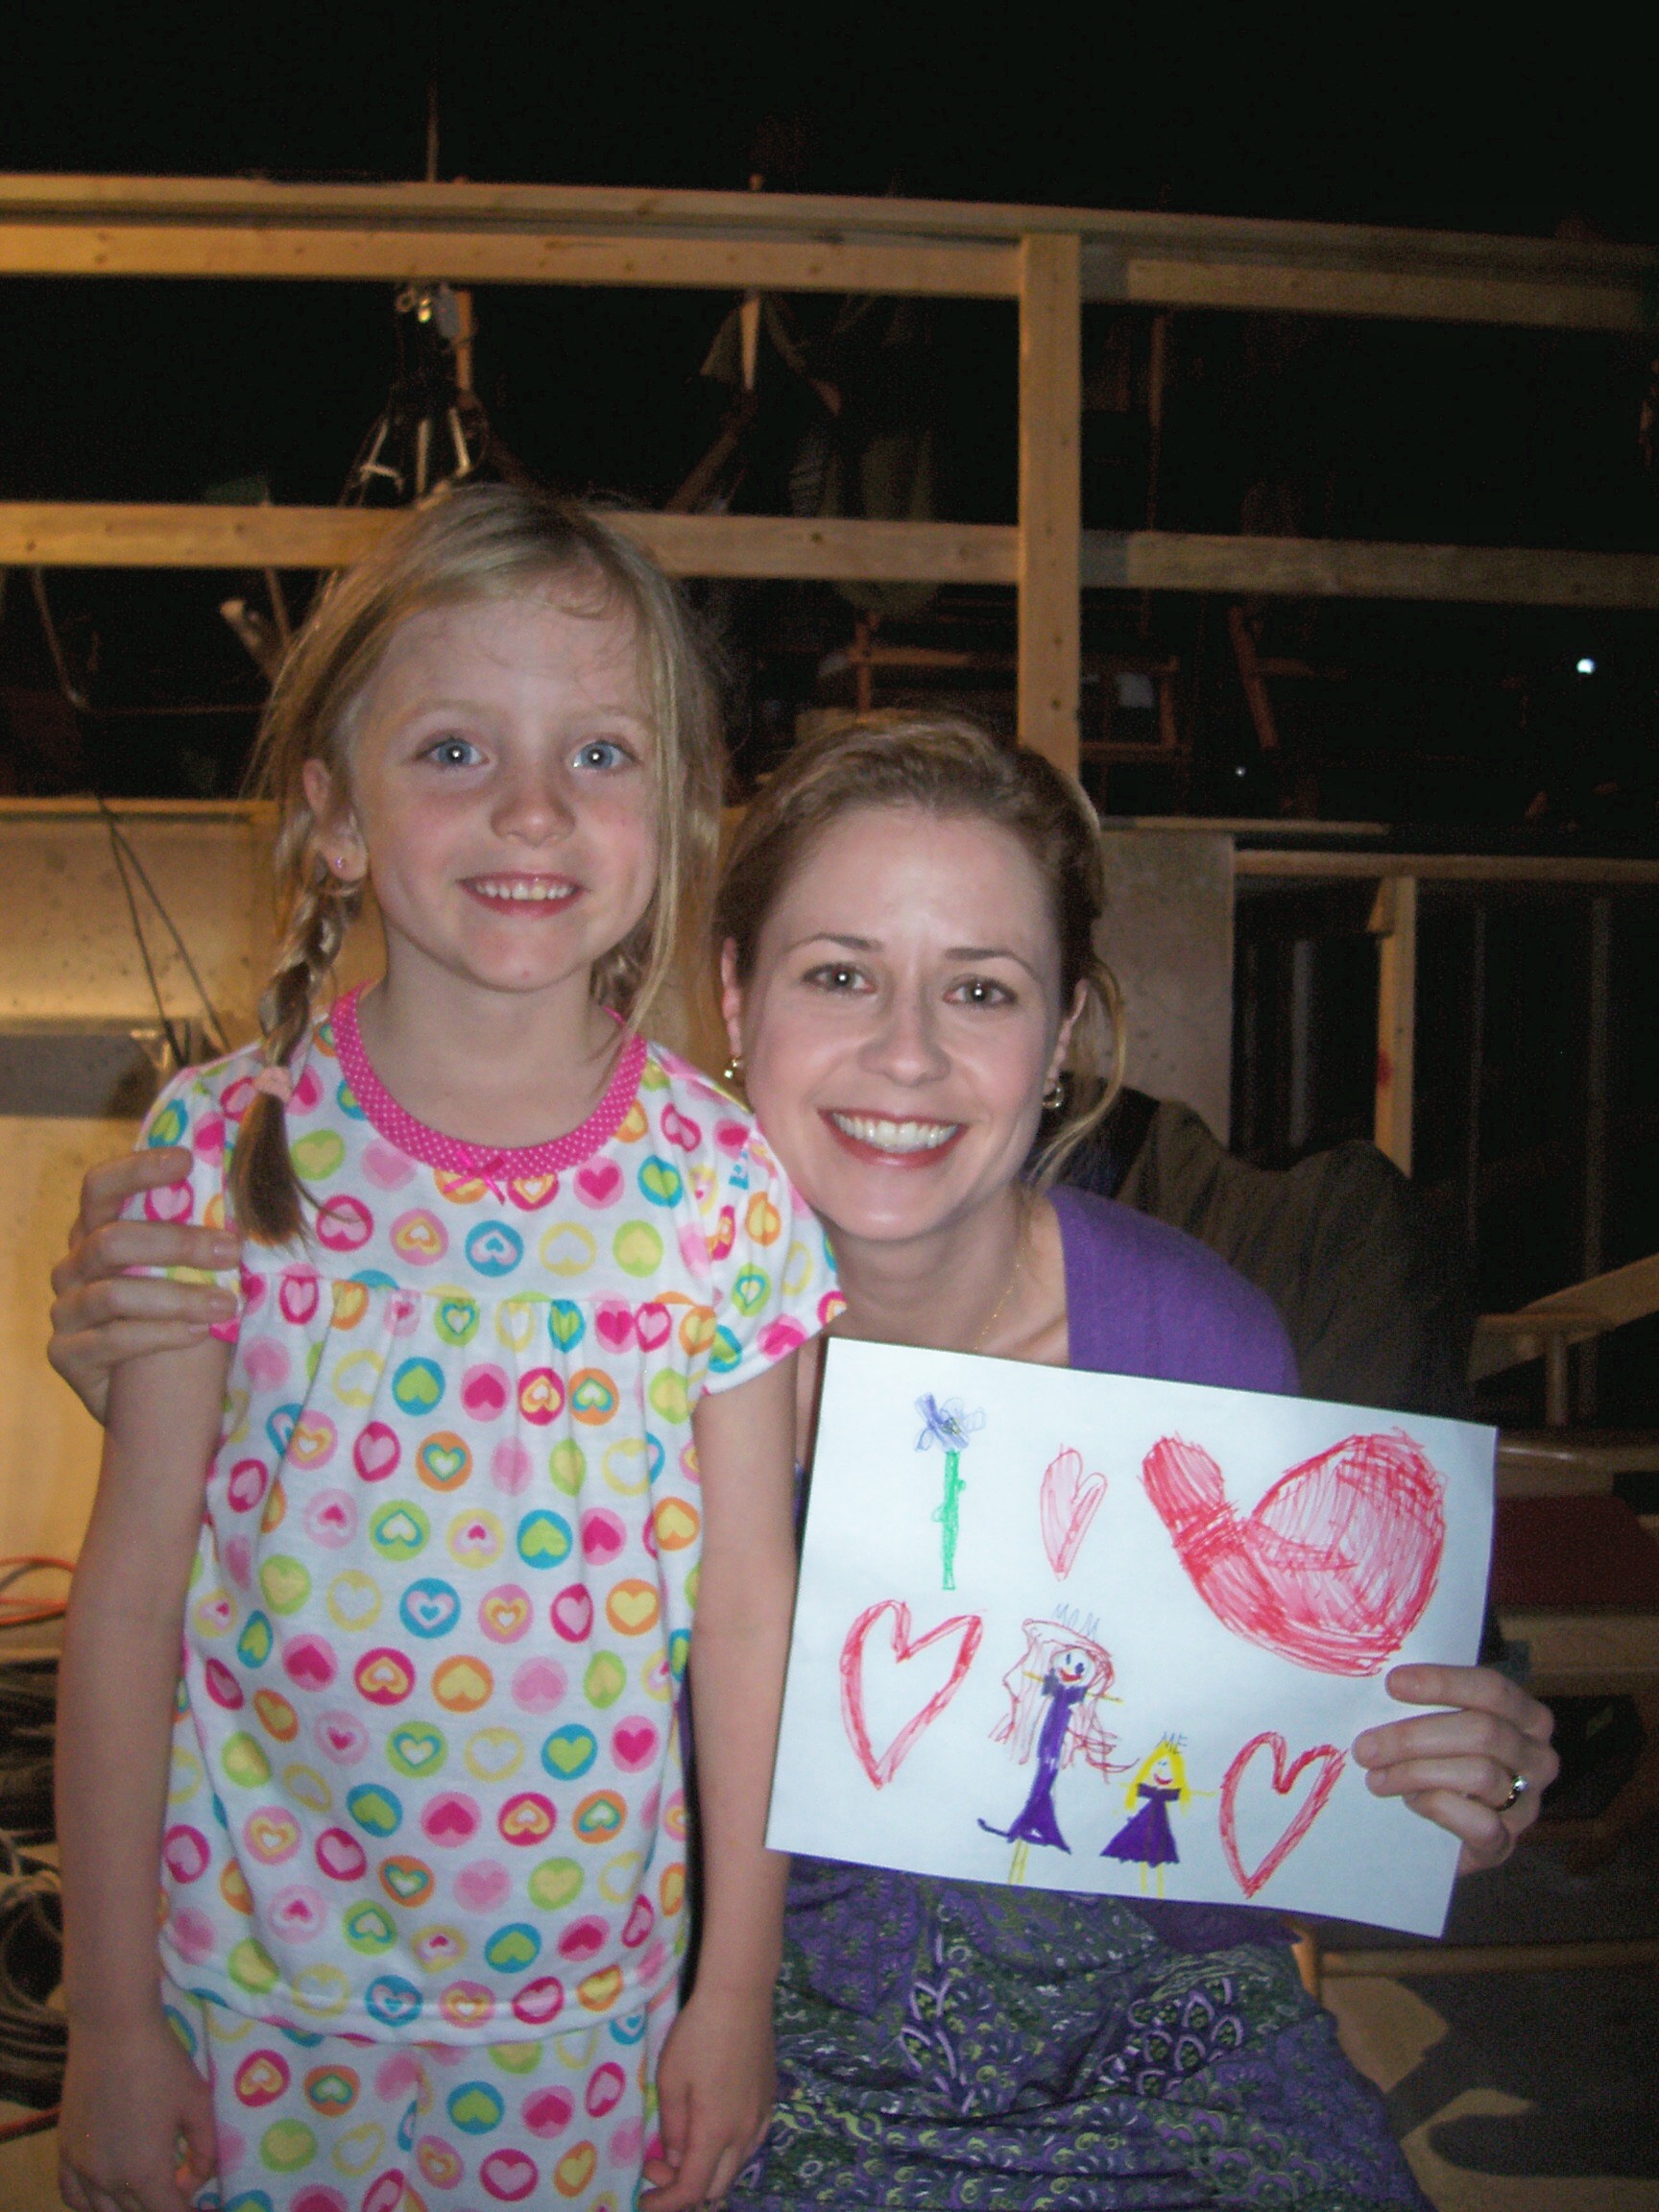 Christa Beth Campbell and Jenna Fischer,her movie Mom, on set together!